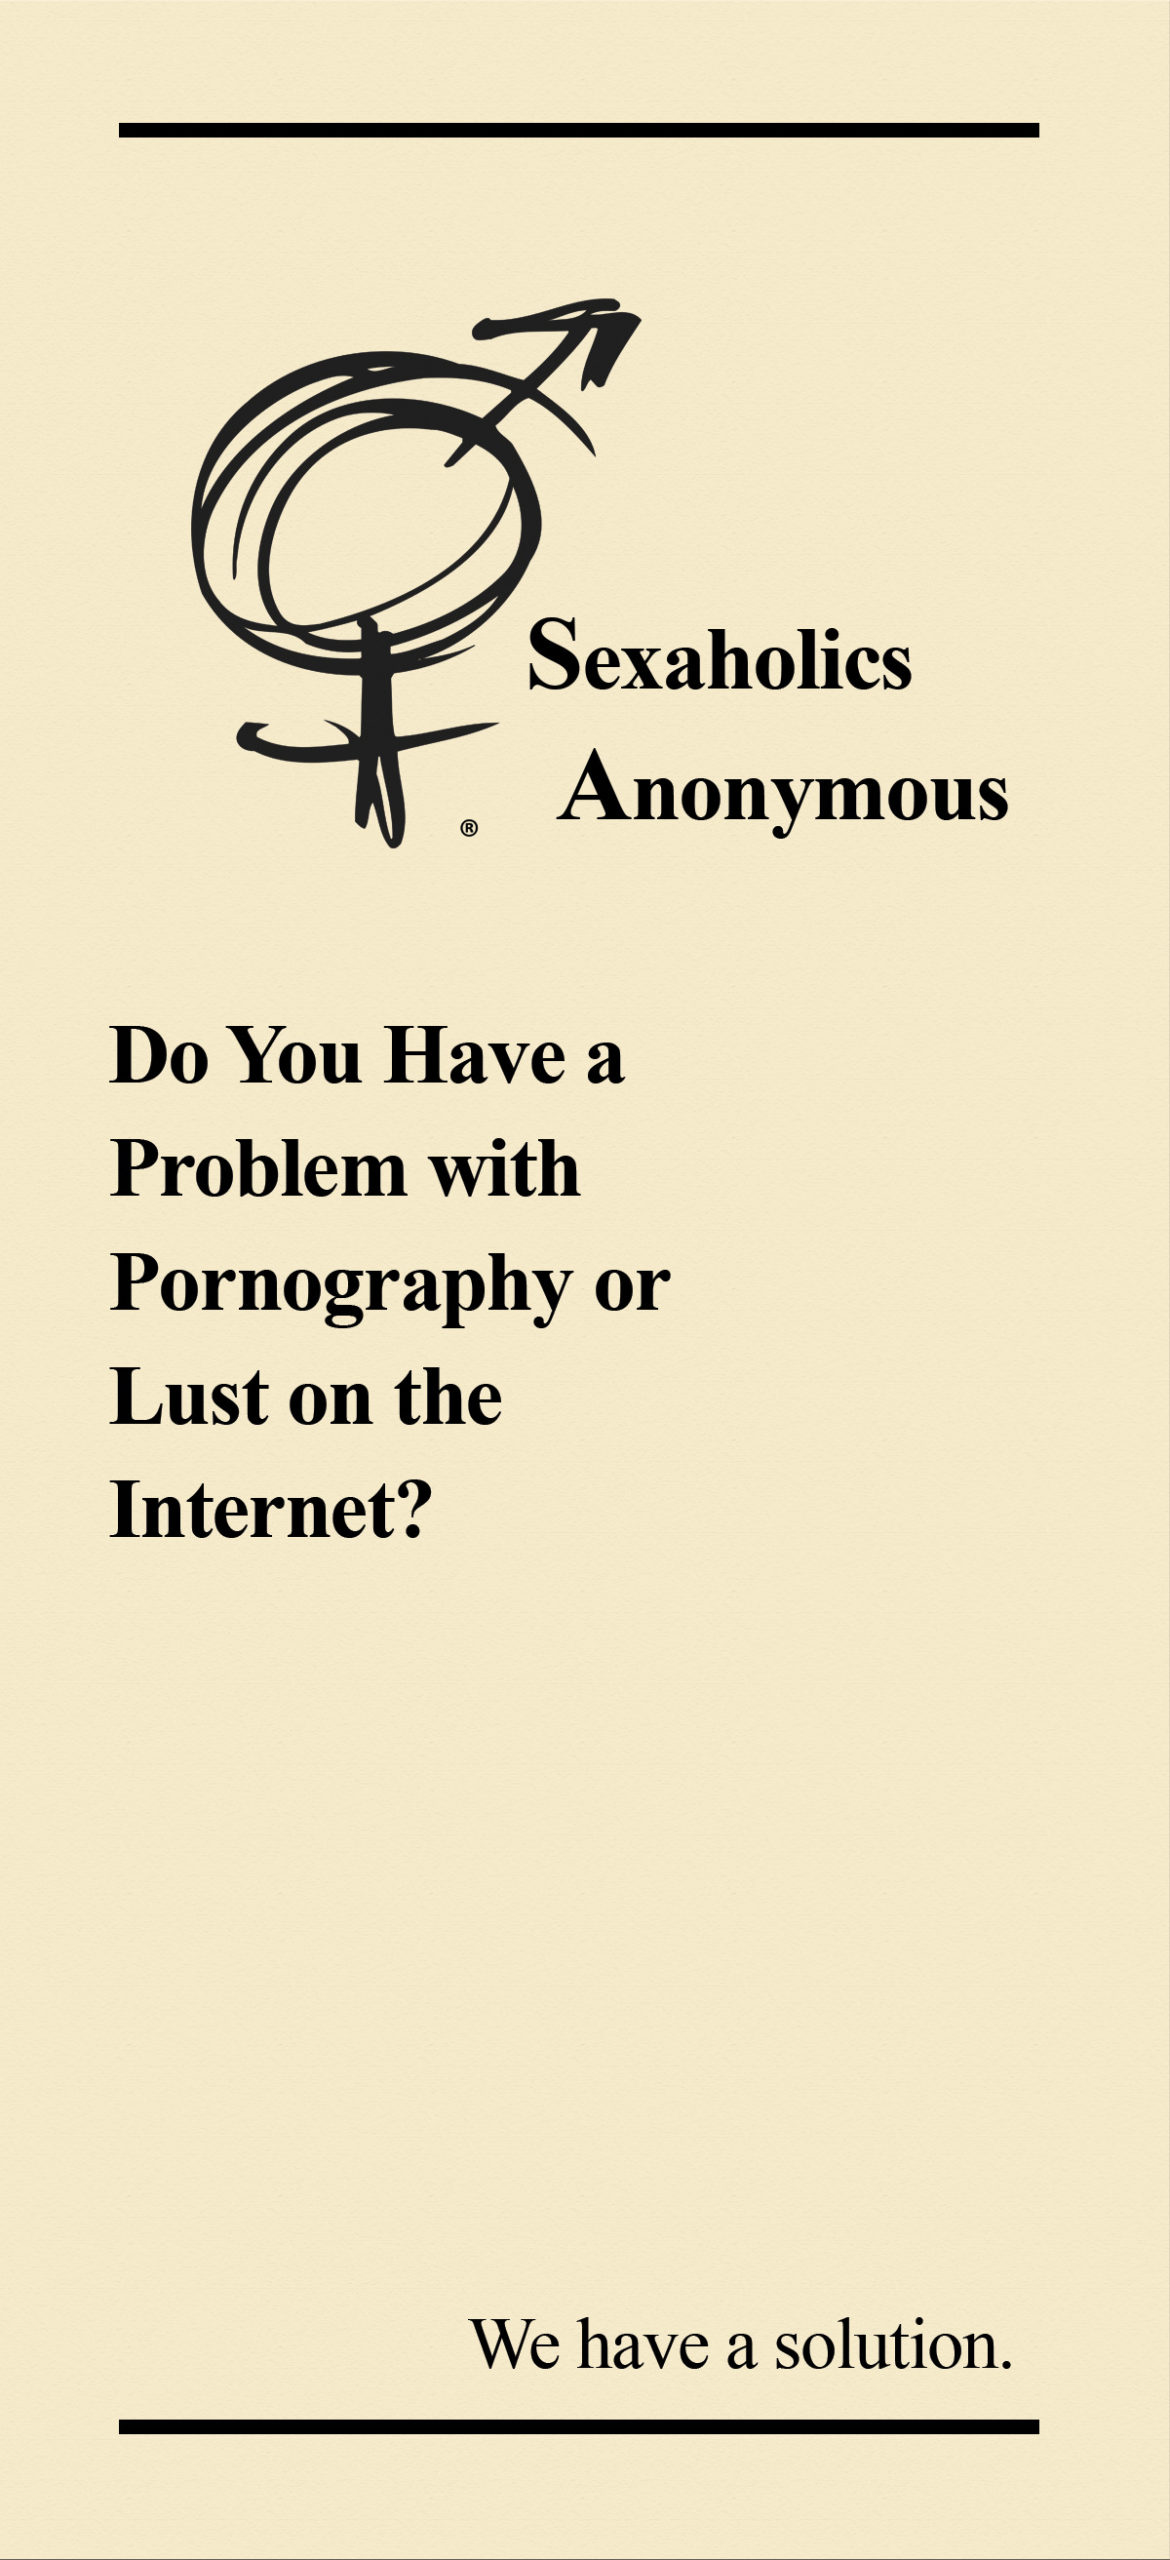 Do You have a Problem with Pornography or Lust on the Internet?